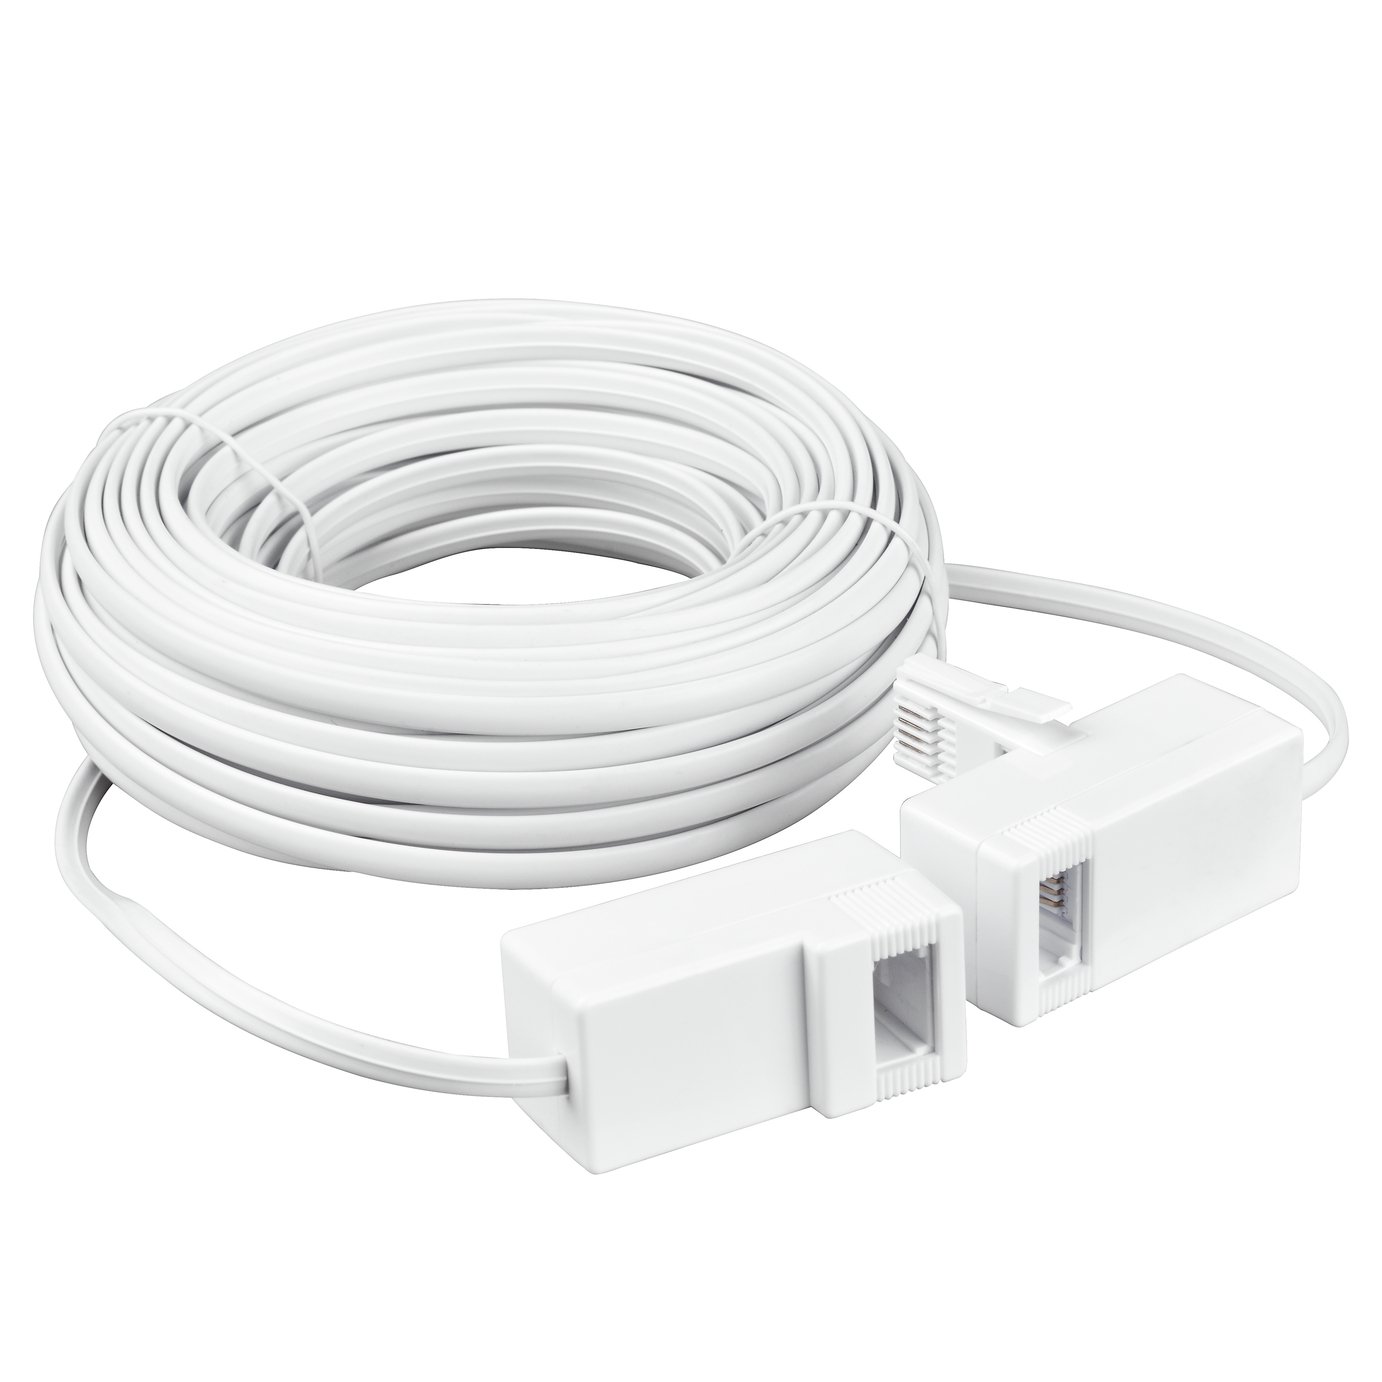 Masterplug 15 Metre Compact, Clear Telephone Extension Kit Review